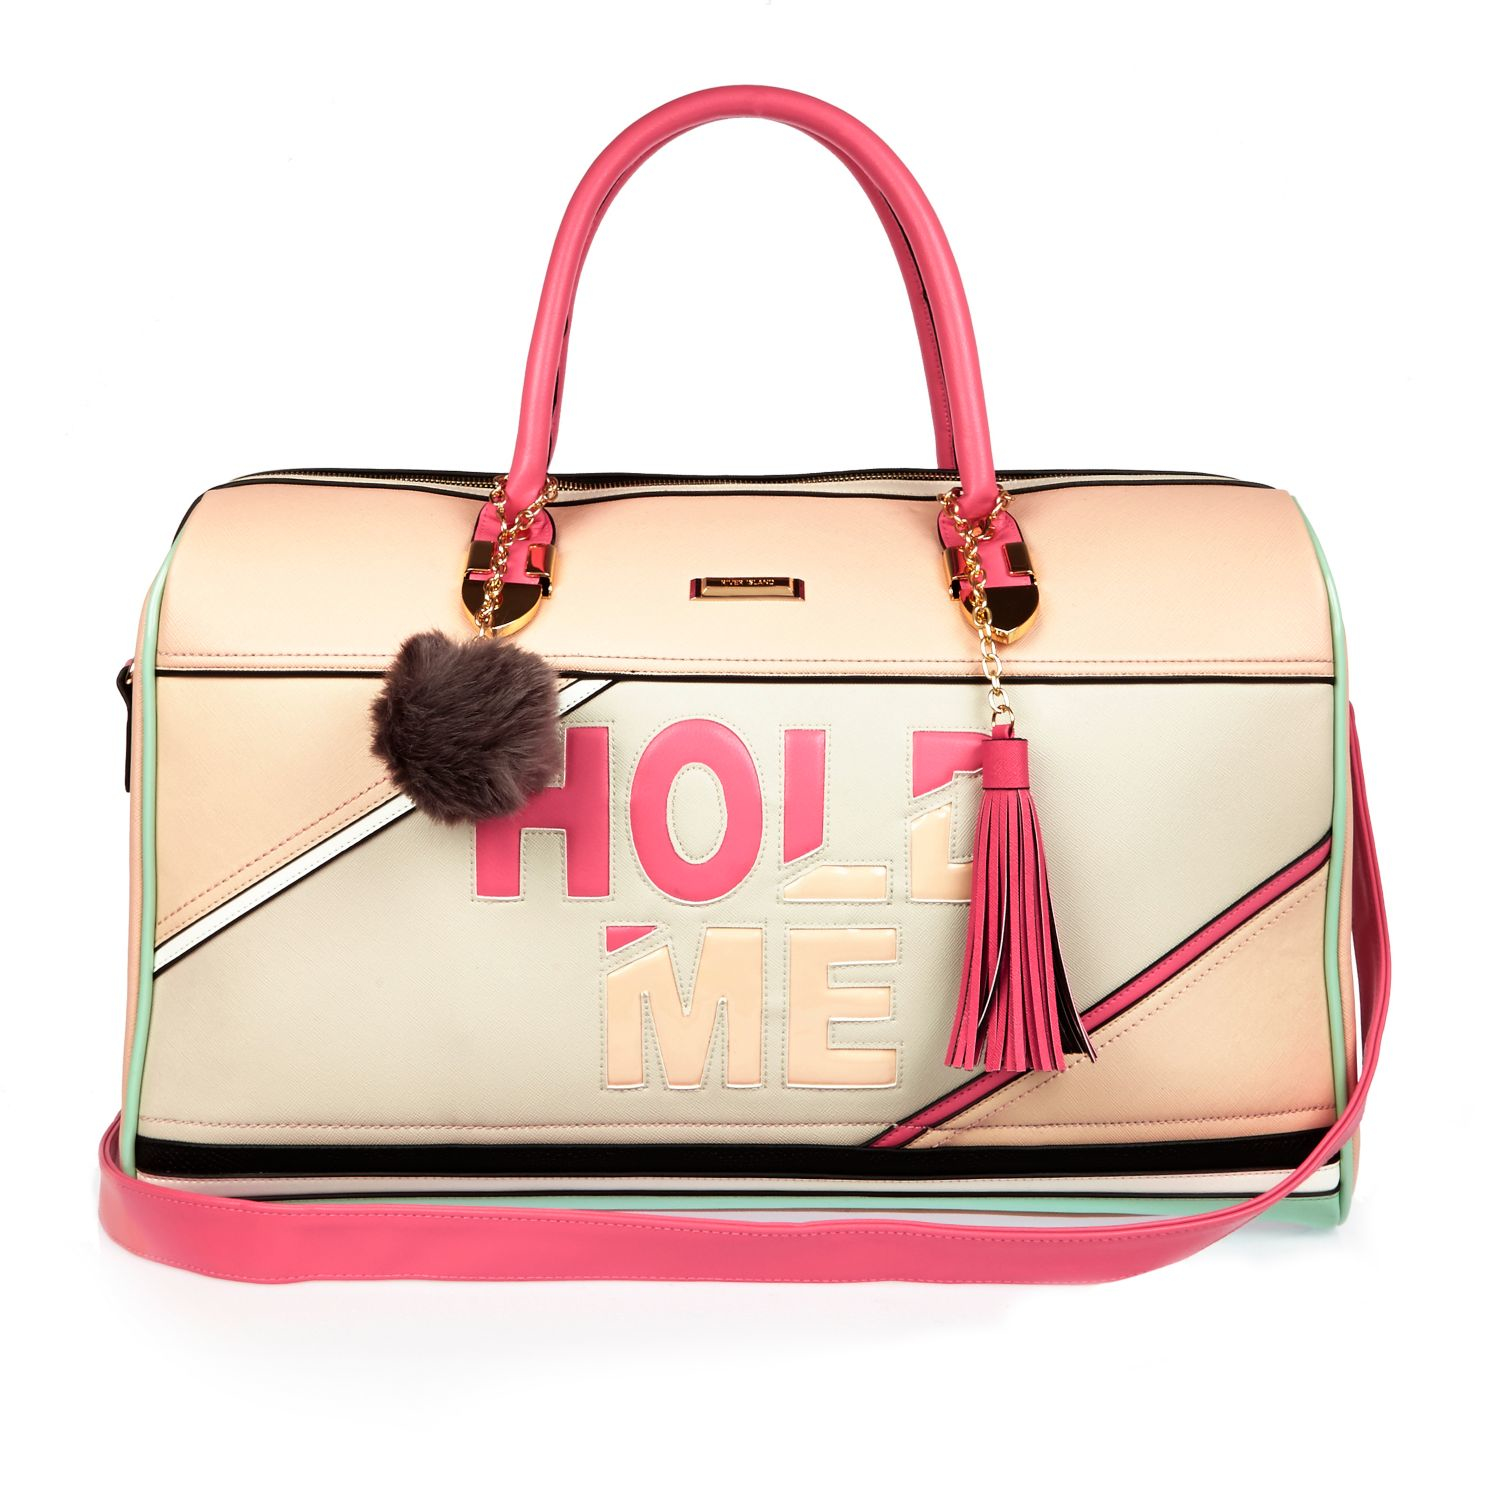 Lyst - River Island Light Pink Hold Me Weekend Bag in Pink